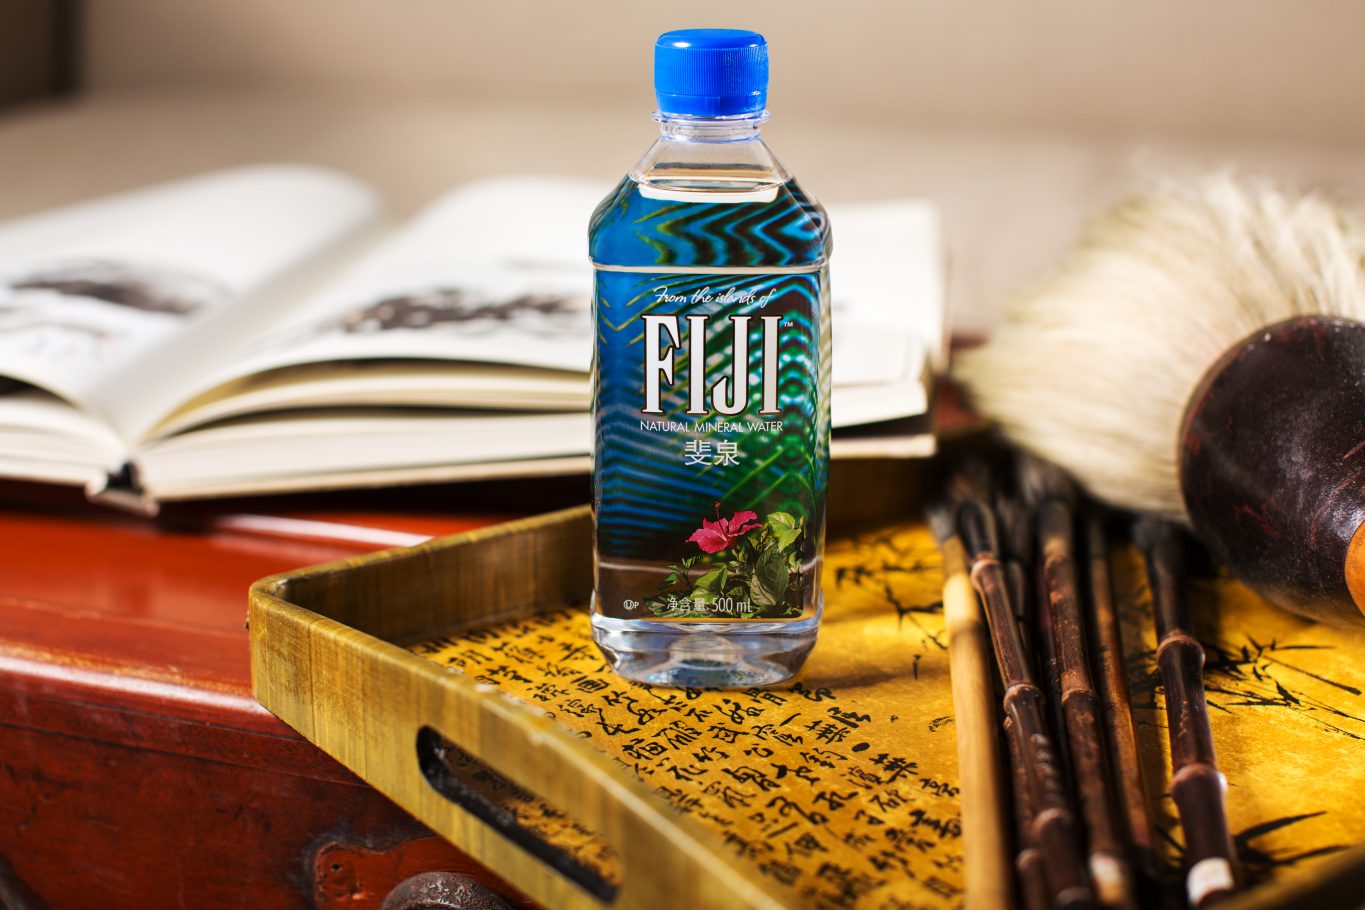 Commercial Photography, Fiji Water